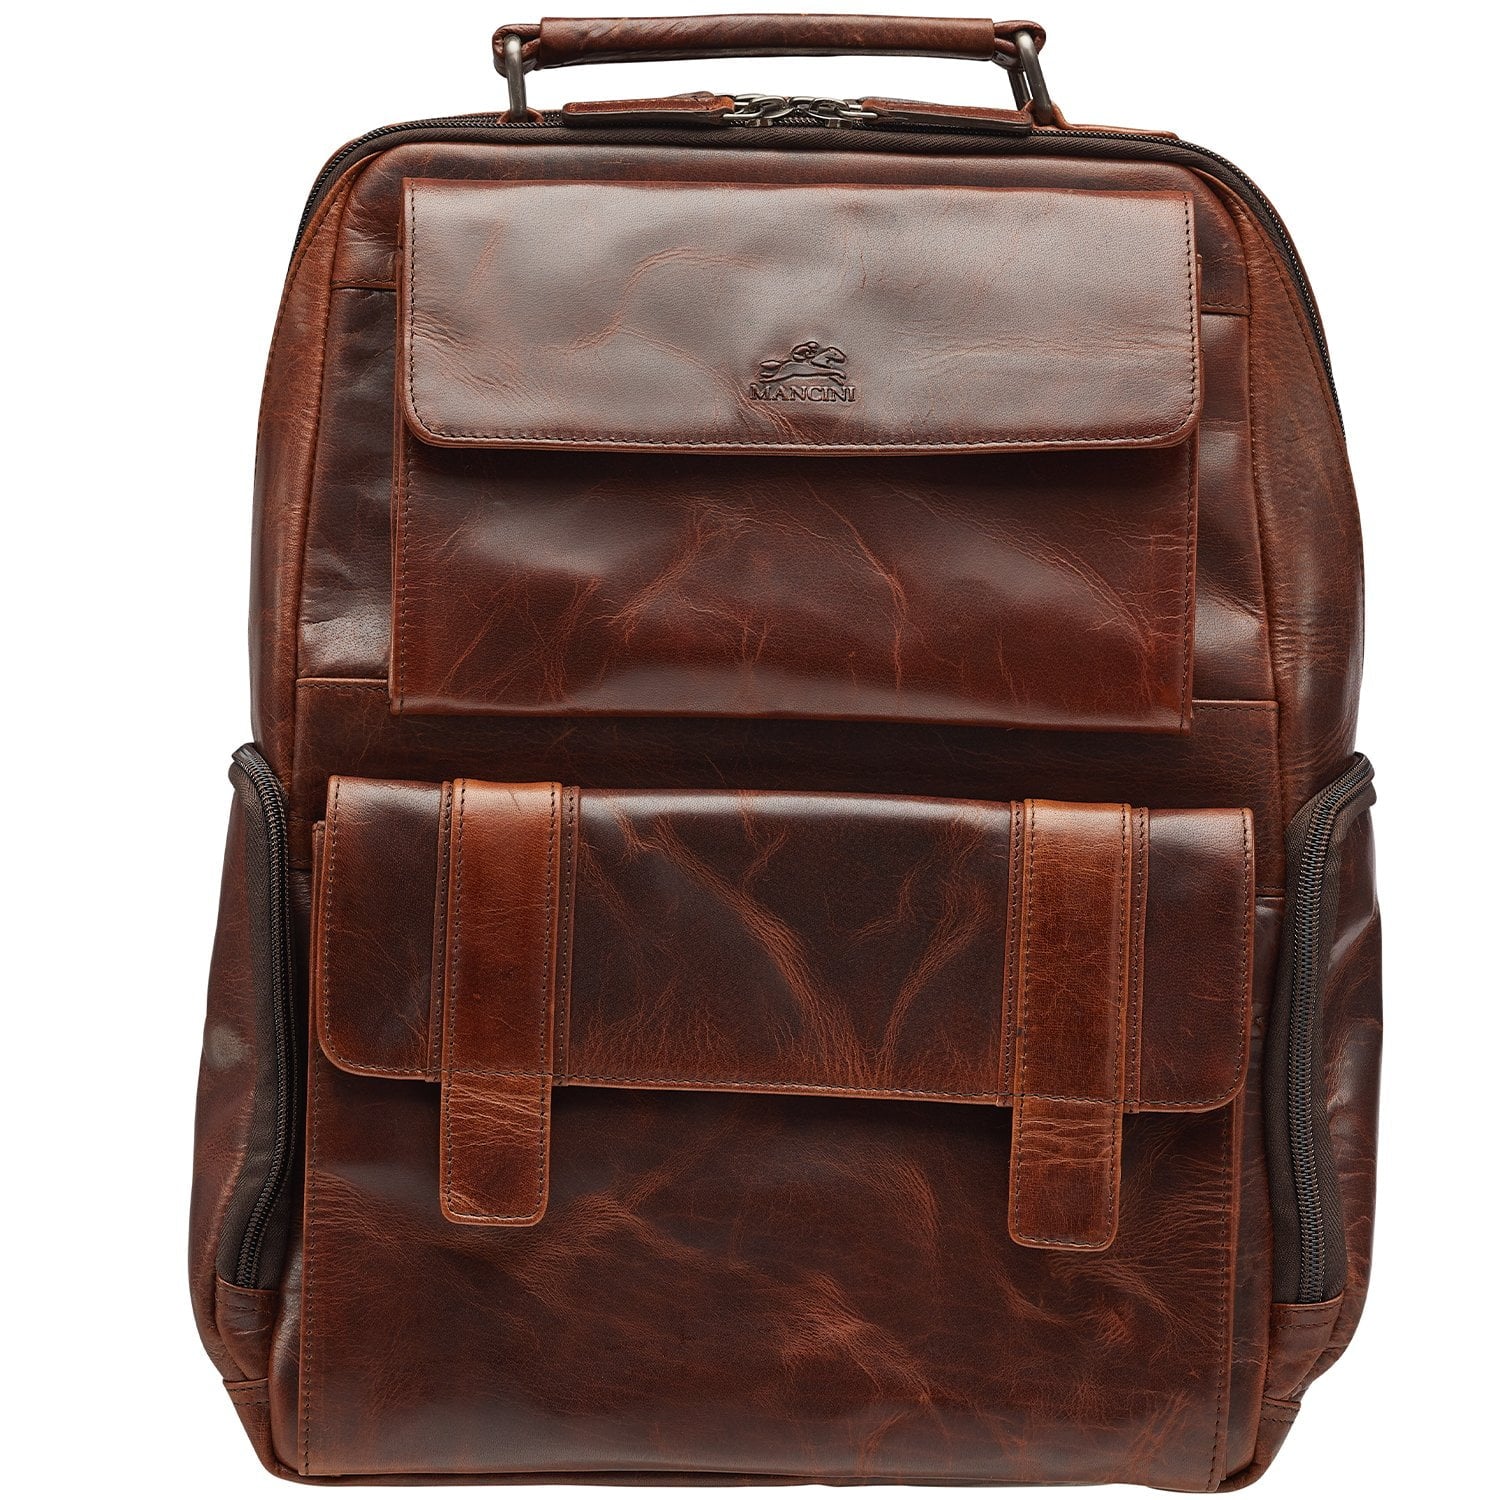 Mancini BUFFALO Backpack with RFID Secure Pocket for 15.6” Laptop  - Brown